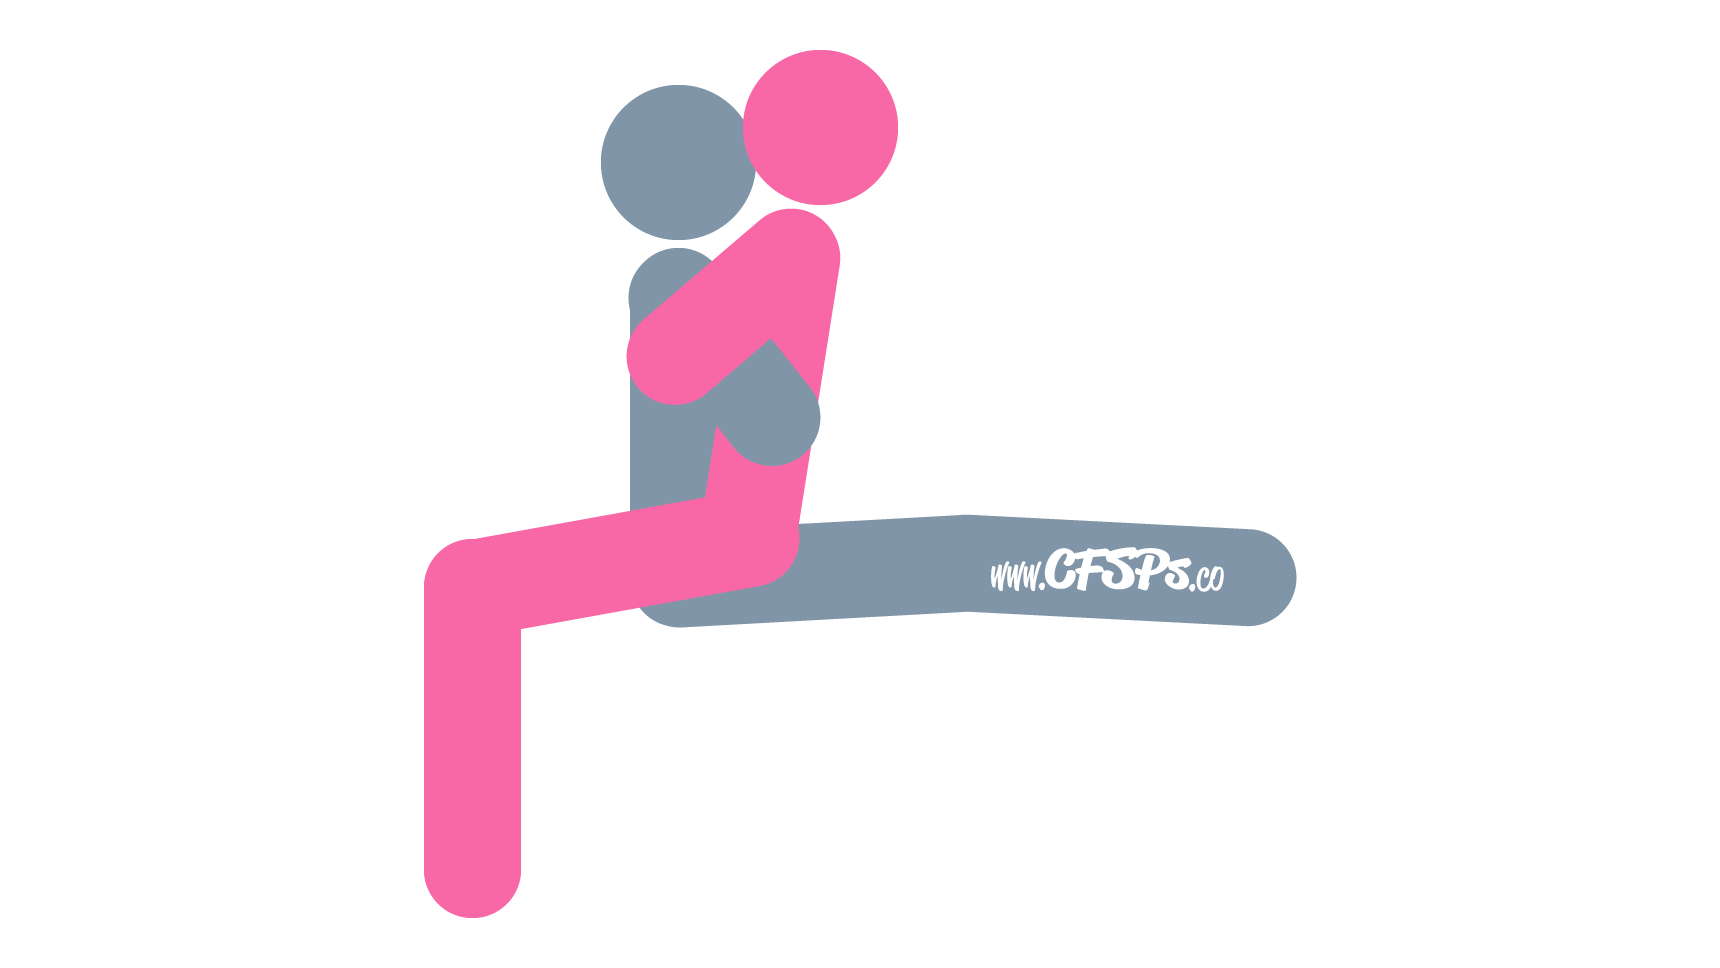 This stick figure image depicts a man and woman having sex in the Lazy Love Seat sex position. The man is sitting on the edge of the bed with his back facing away from the bed and his legs straight in front of him. The woman is straddling his pelvis while facing him with her feet hanging off the side of the bed.